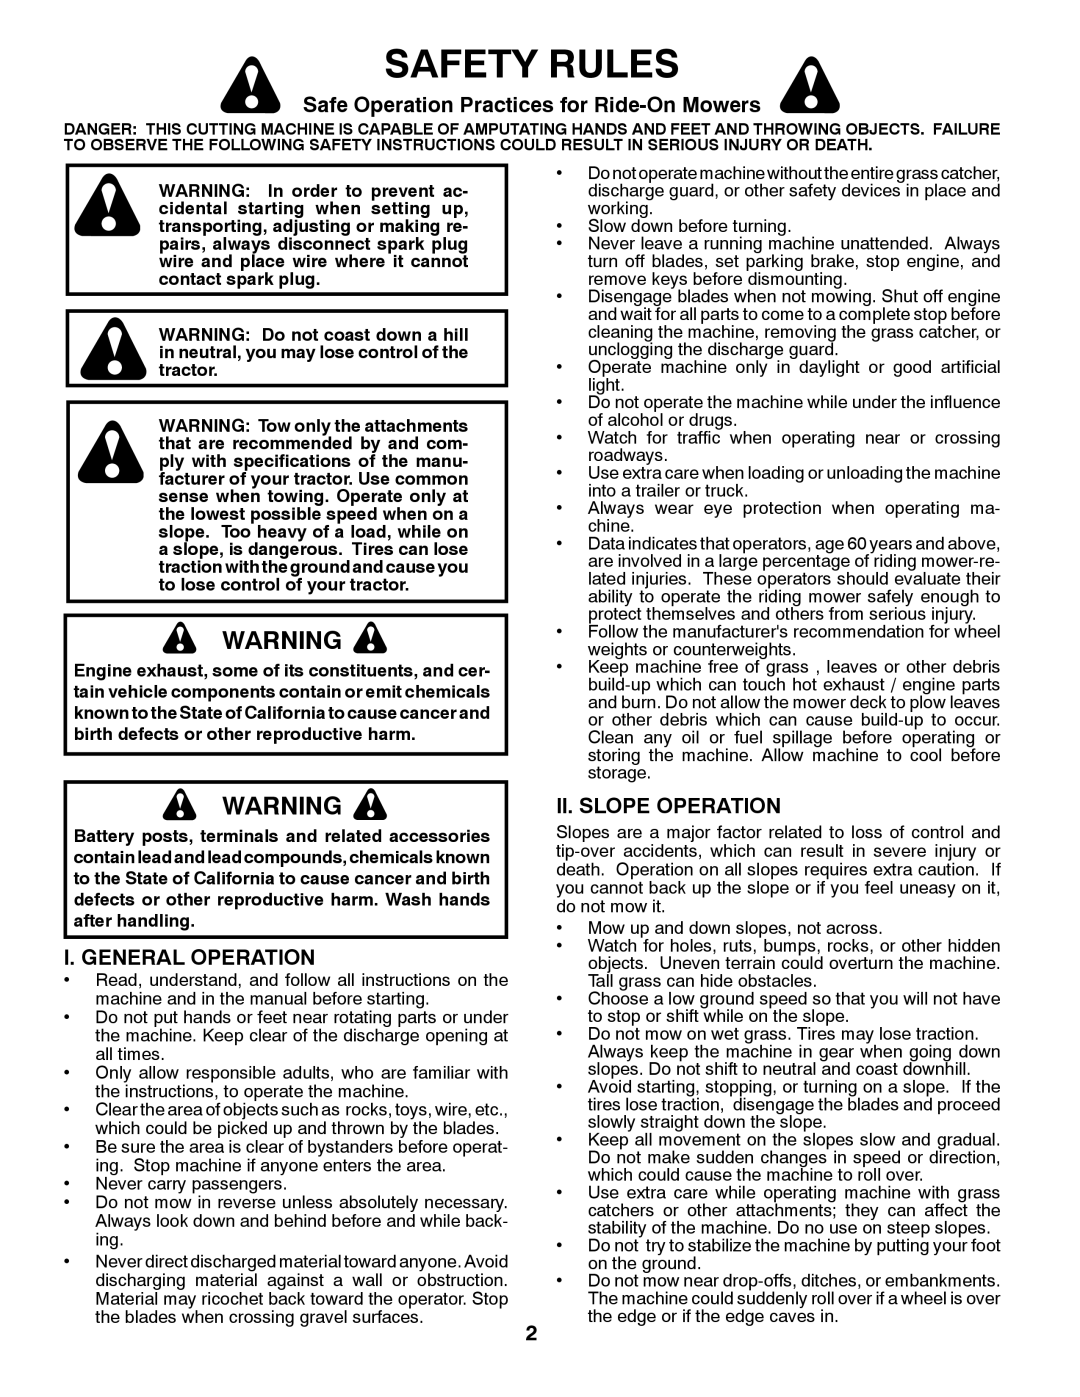 Univex 96043004400 Safety Rules, Safe Operation Practices for Ride-OnMowers, I. General Operation, Ii. Slope Operation 